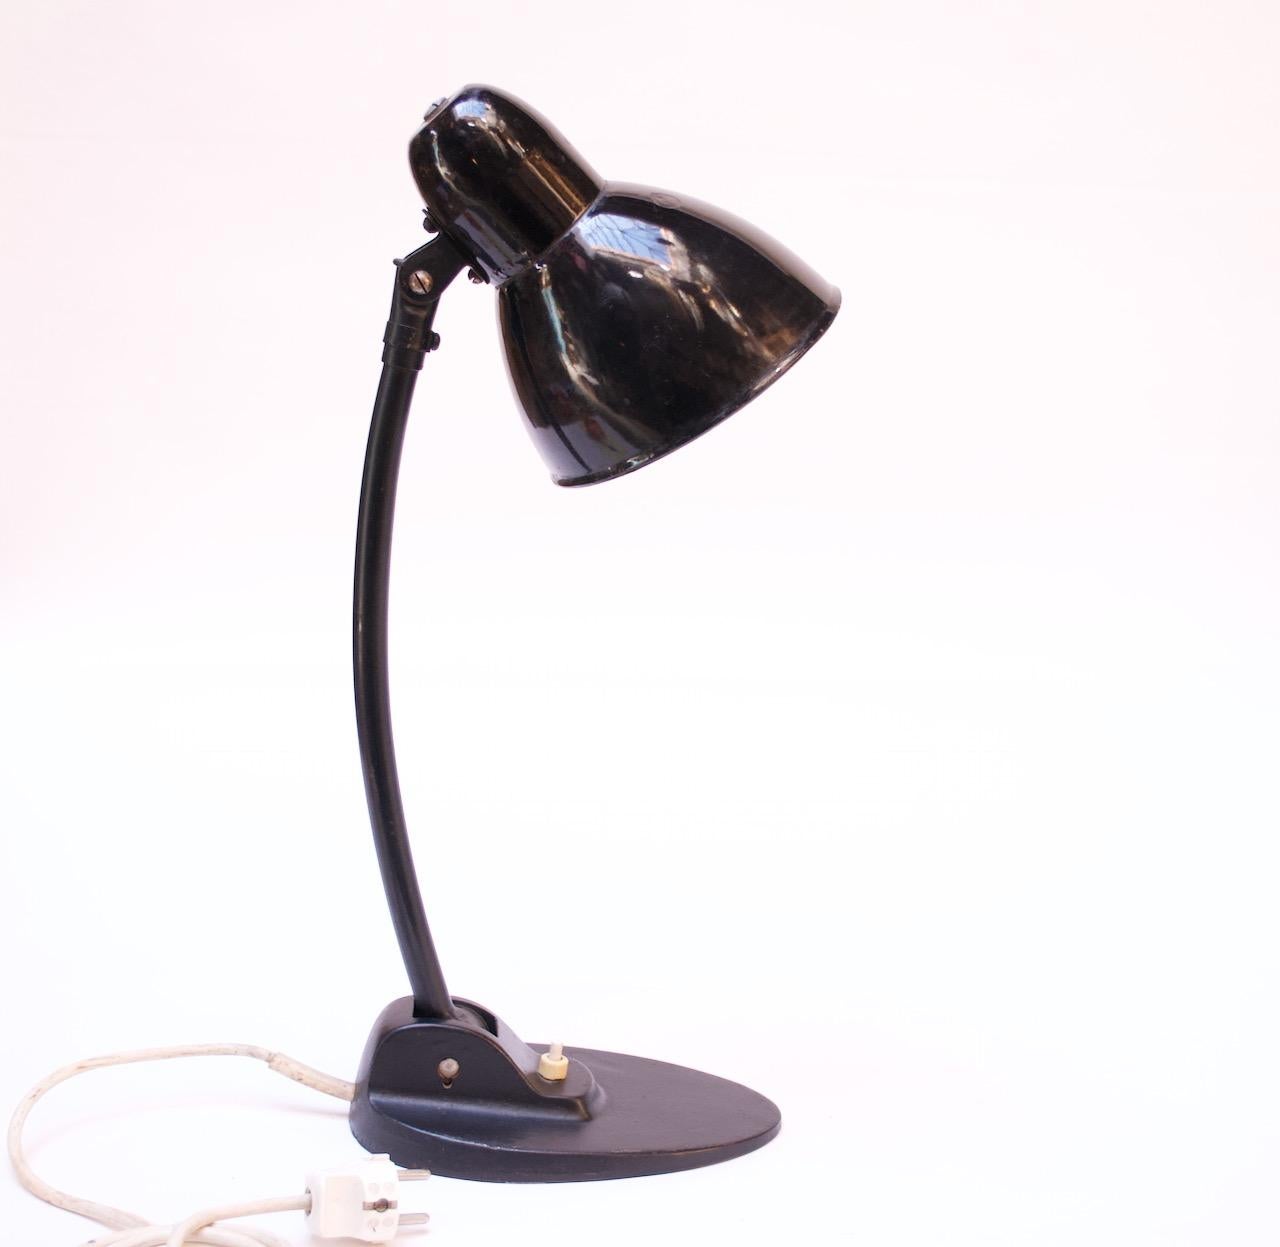 Desk / table lamp by Jacobus of Germany featuring a porcelain enamel shade and painted metal base / stepped foot, circa 1930. Highly functional with an articulated stem and fully adjustable shade.
Original paint shows heavy wear (dents, scratches,